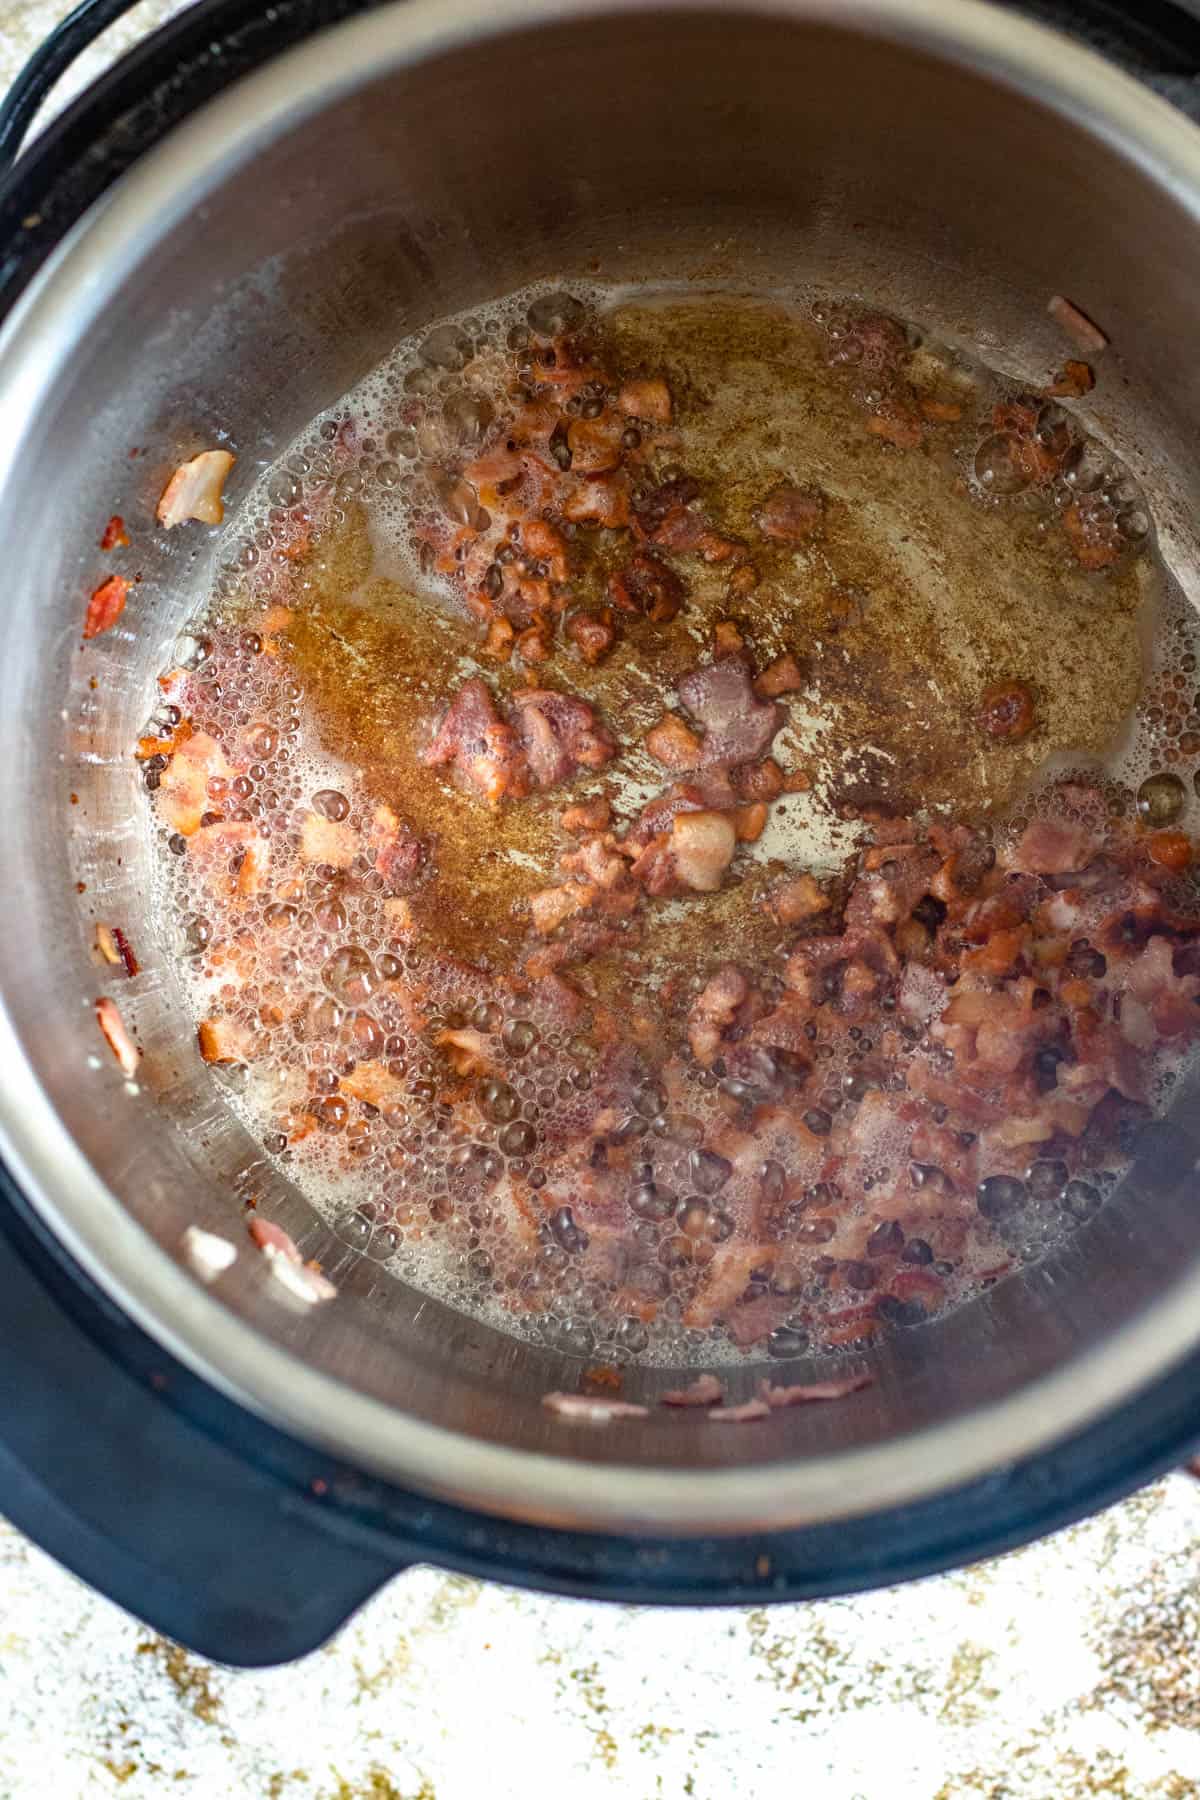 Cooked bacon in an Instant Pot